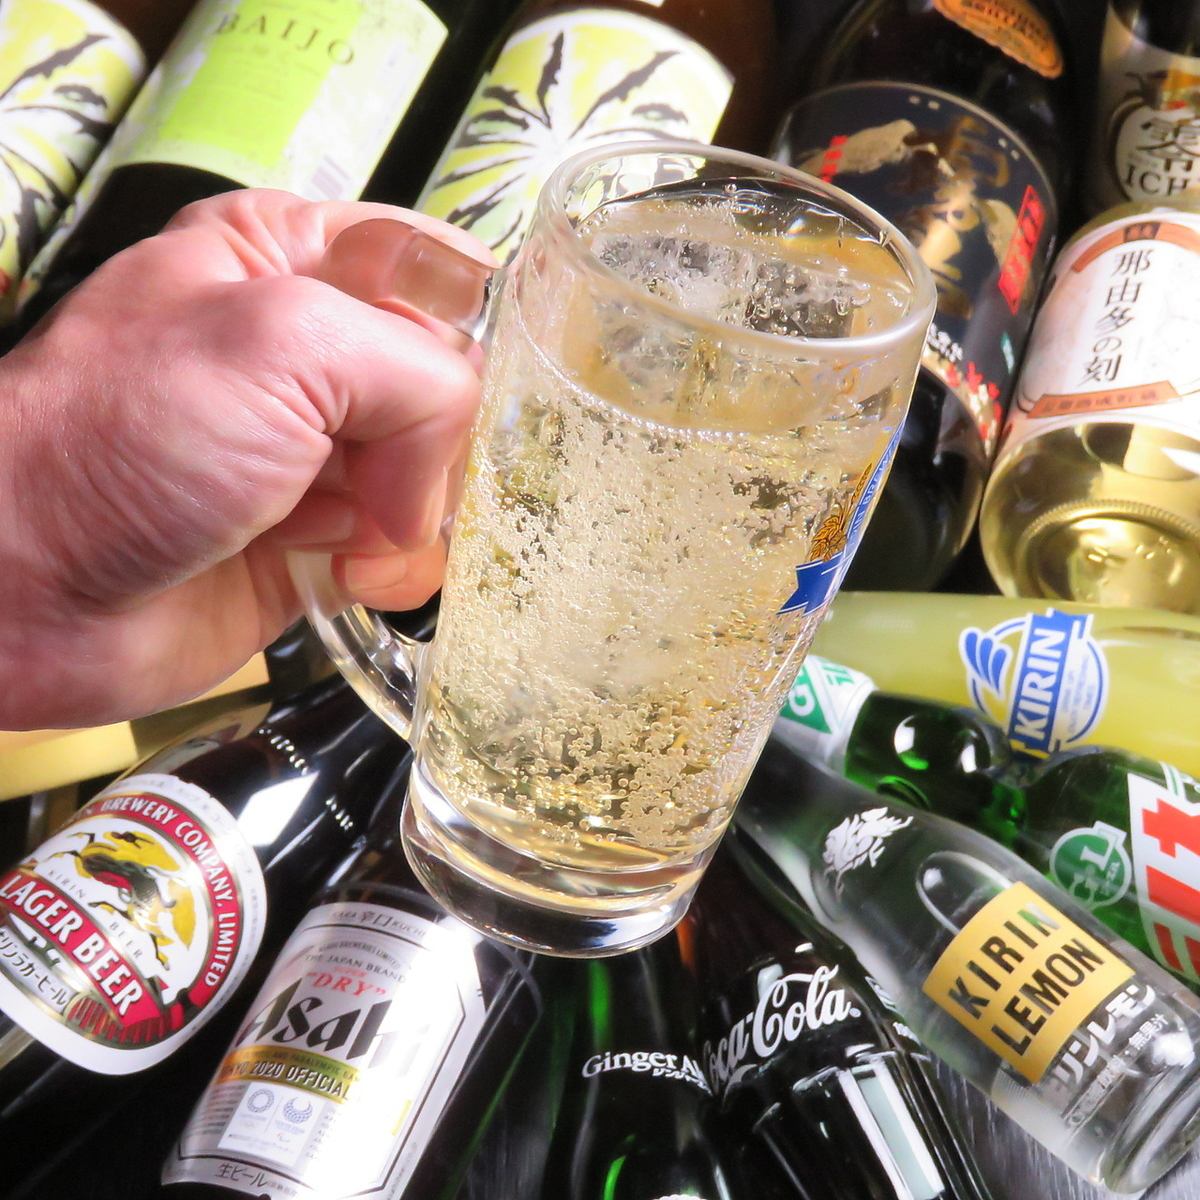 [All-you-can-drink] 120 minutes all-you-can-drink 2,000 yen ♪ Bottled beer is also OK ♪